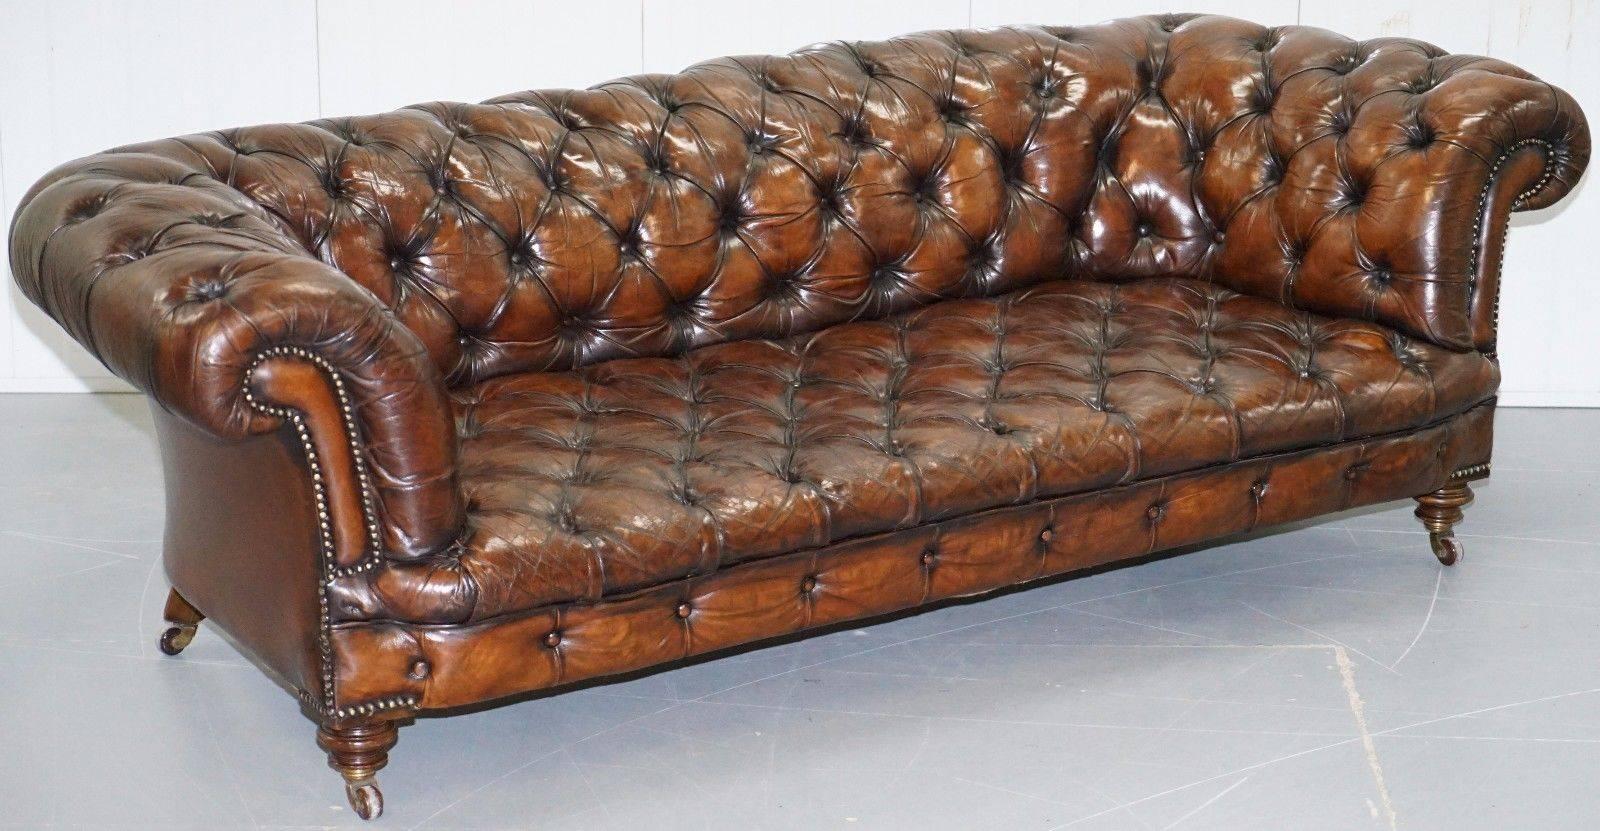 We are delighted to offer for sale this lovely rare original Victorian 1890 fully restored Cornelius V Smith Stamped aged brown leather Chesterfield sofa

What can I say, if you’re in the market for the best Victorian Chesterfield sofas in the